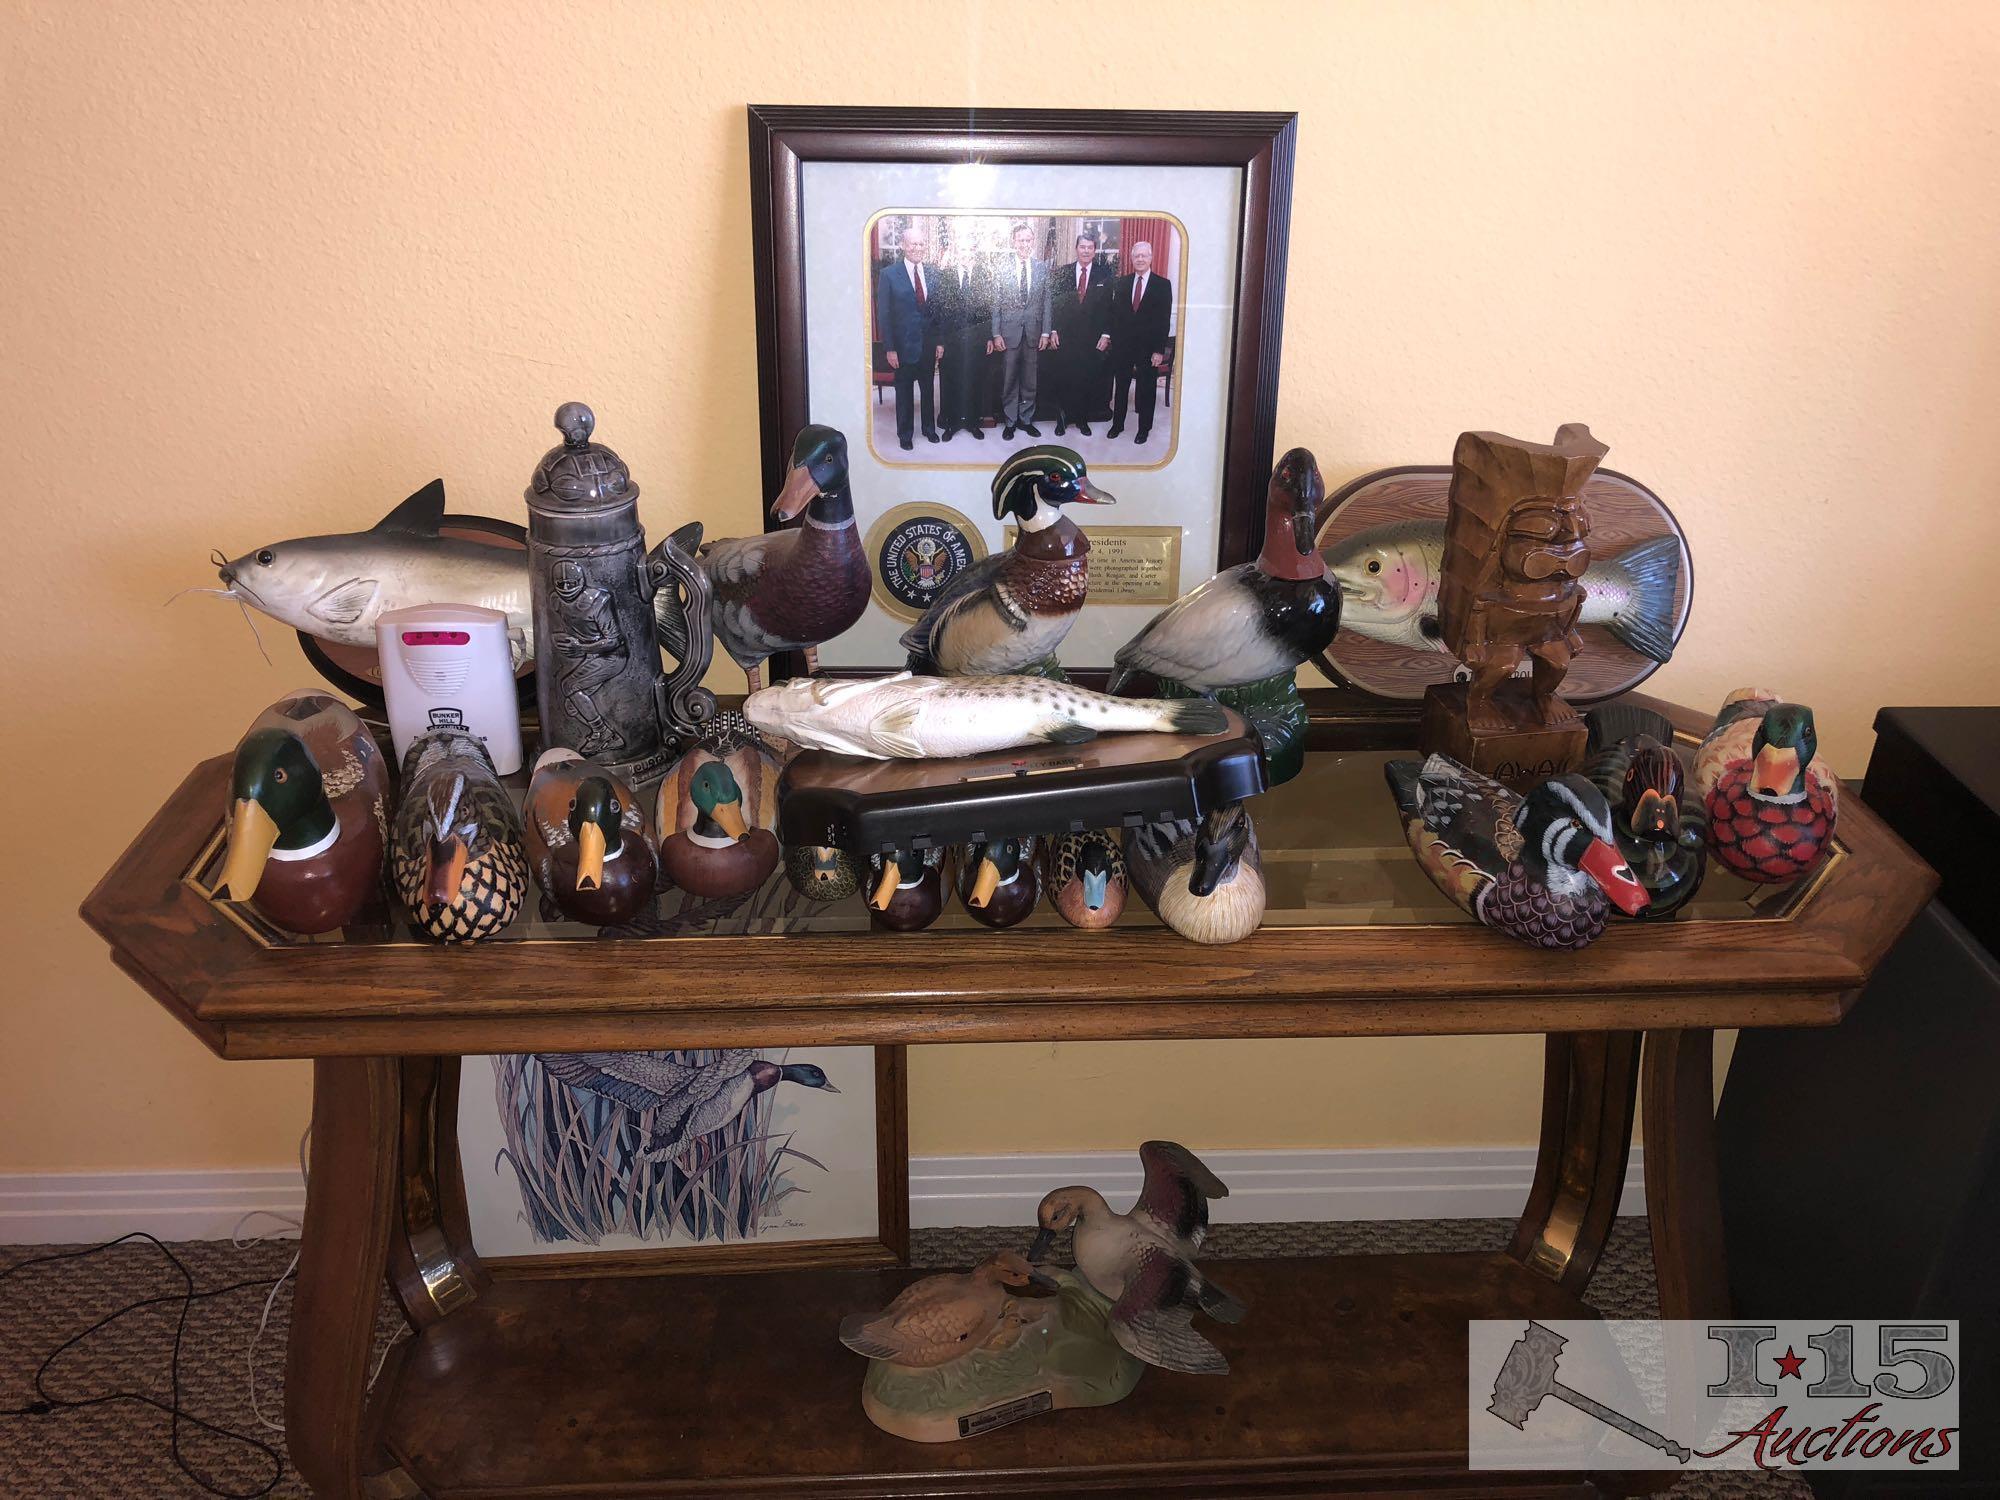 Assorted Ducks, Big Mouth Billy Bass, Beer Stein, Decanters and Five President Photo